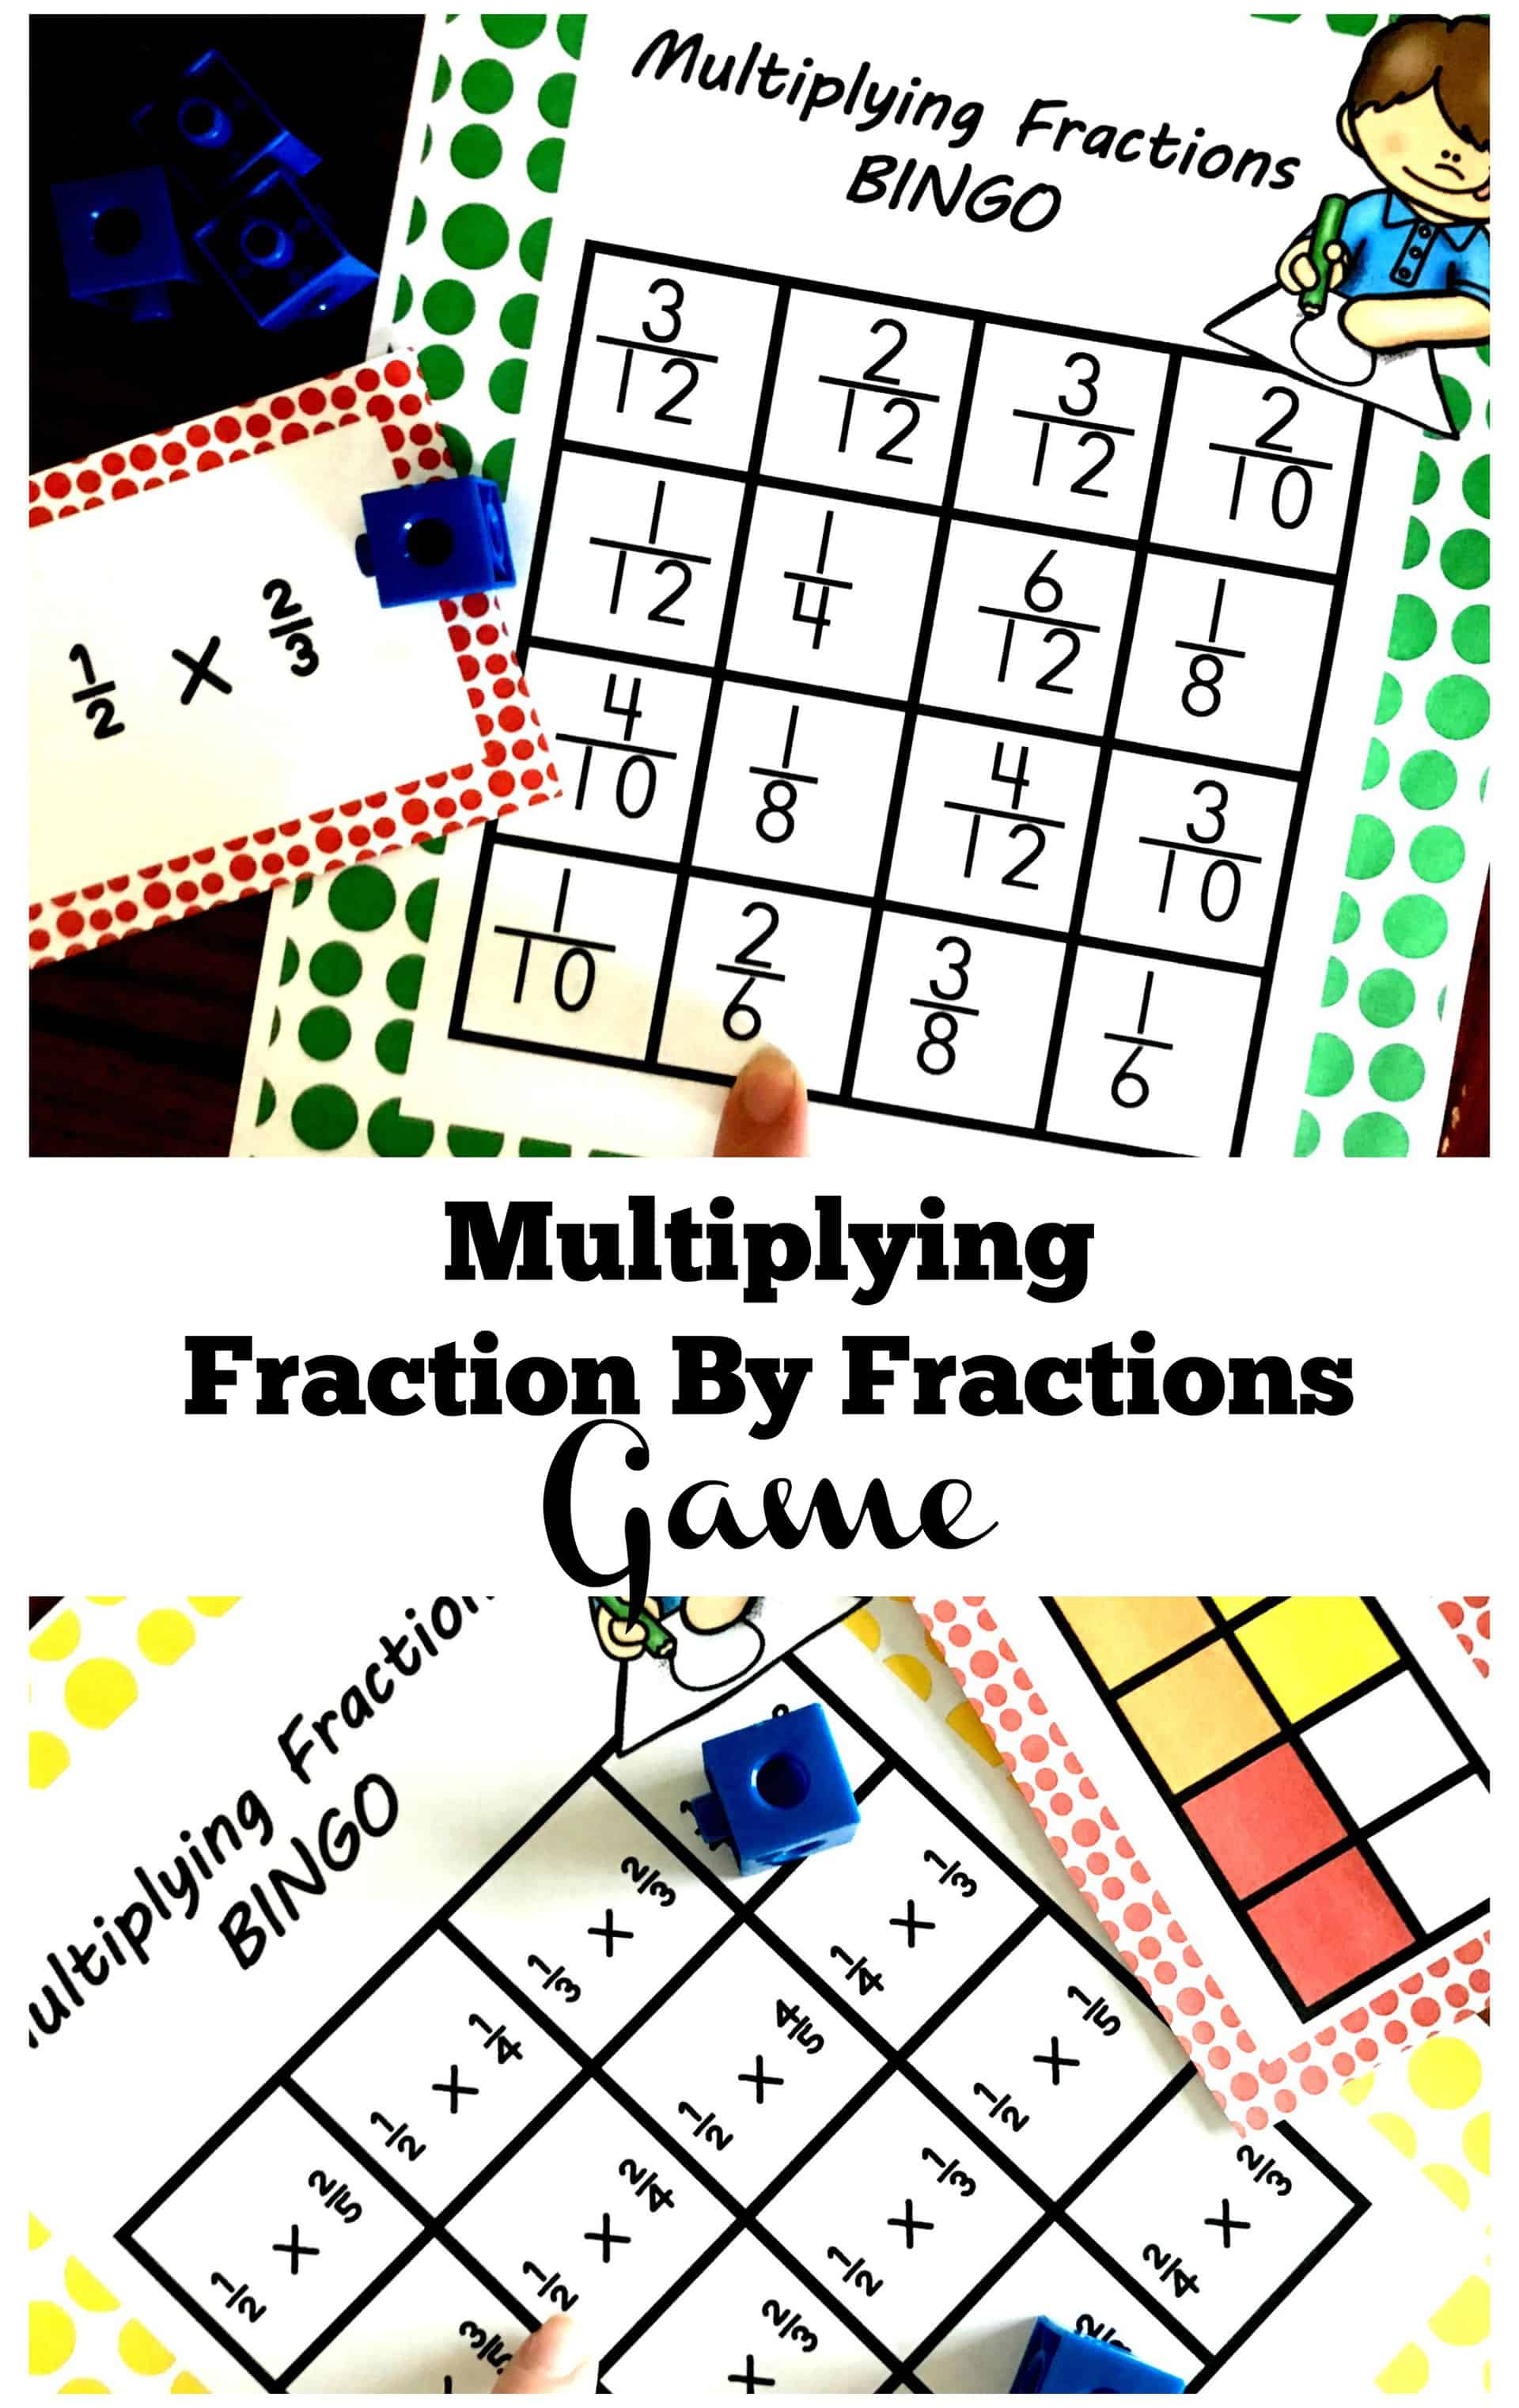 This free multiplying fractions game is a fun way to practice this skill. Children solve expressions and area models and then find the answer on the BINGO card.